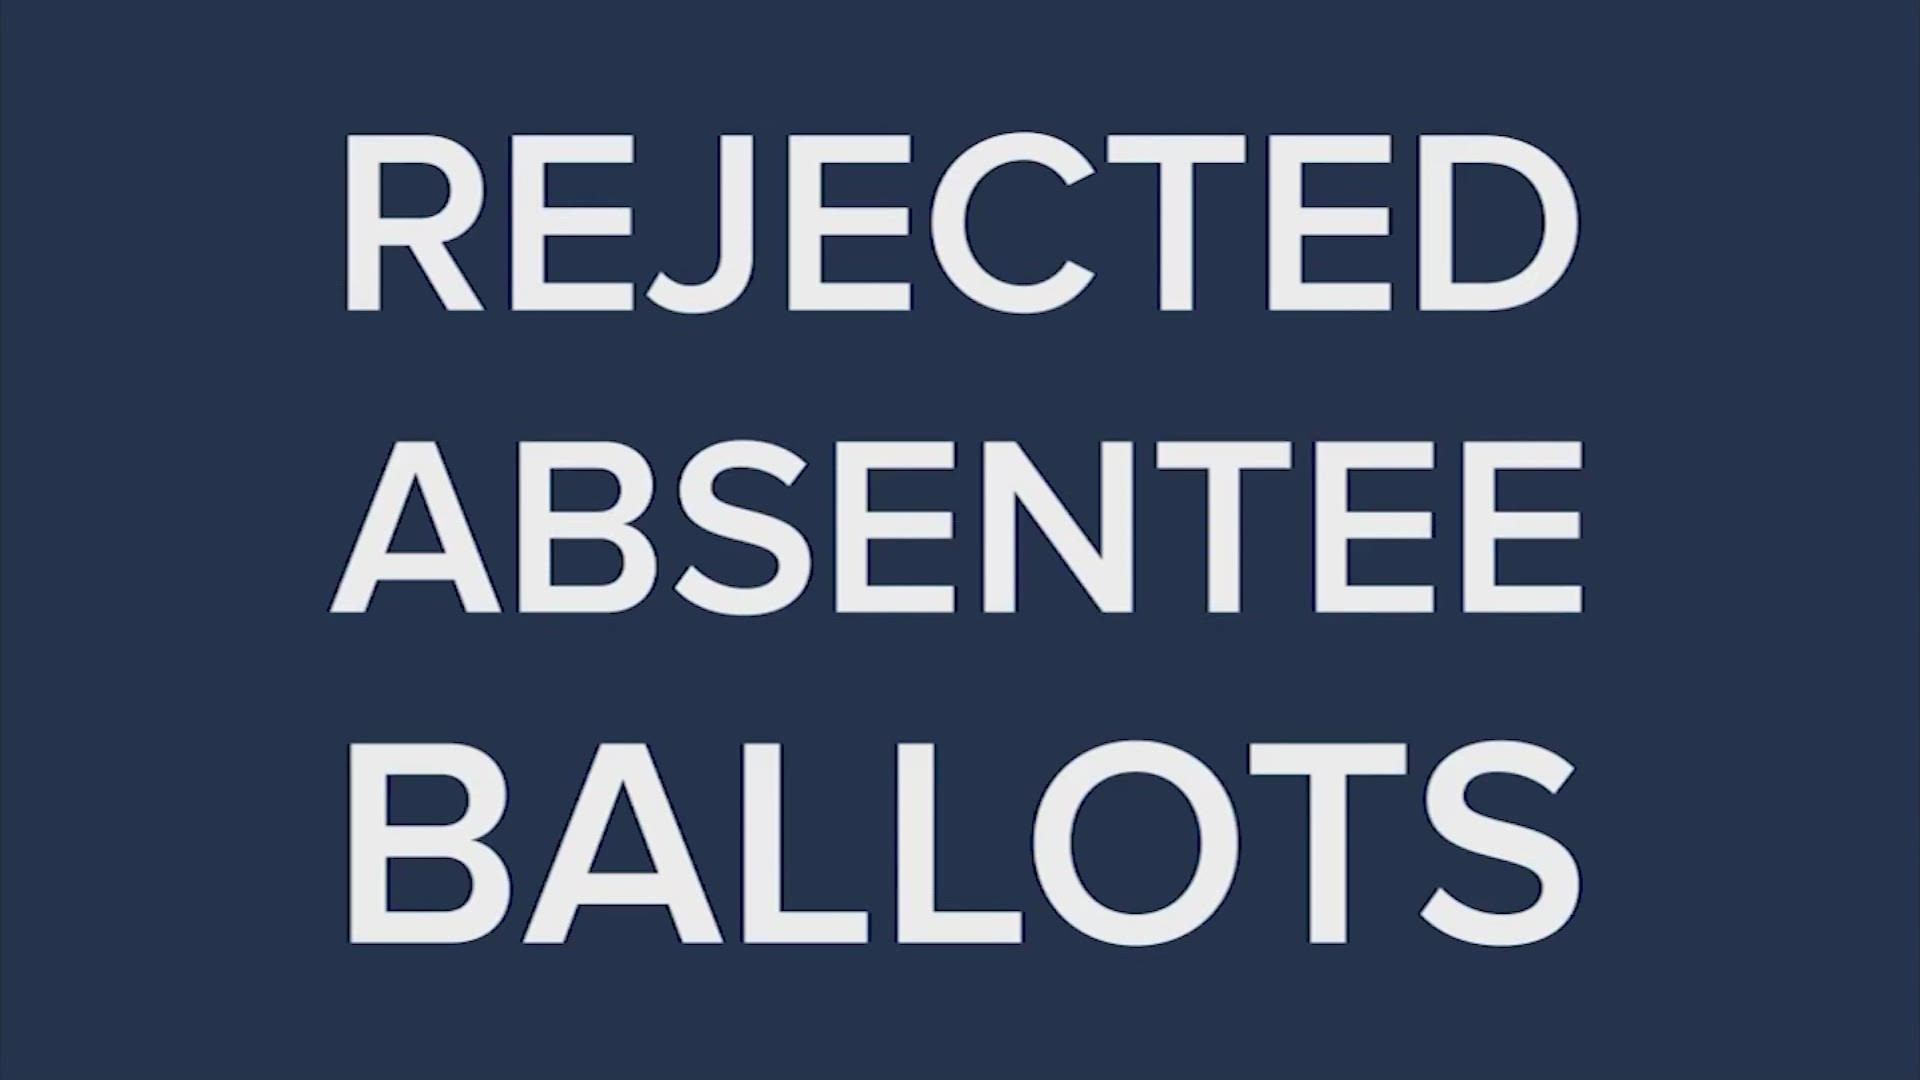 The Iowa Code says your absentee ballot can be rejected for something as simple as not signing your name or mailing it on time.